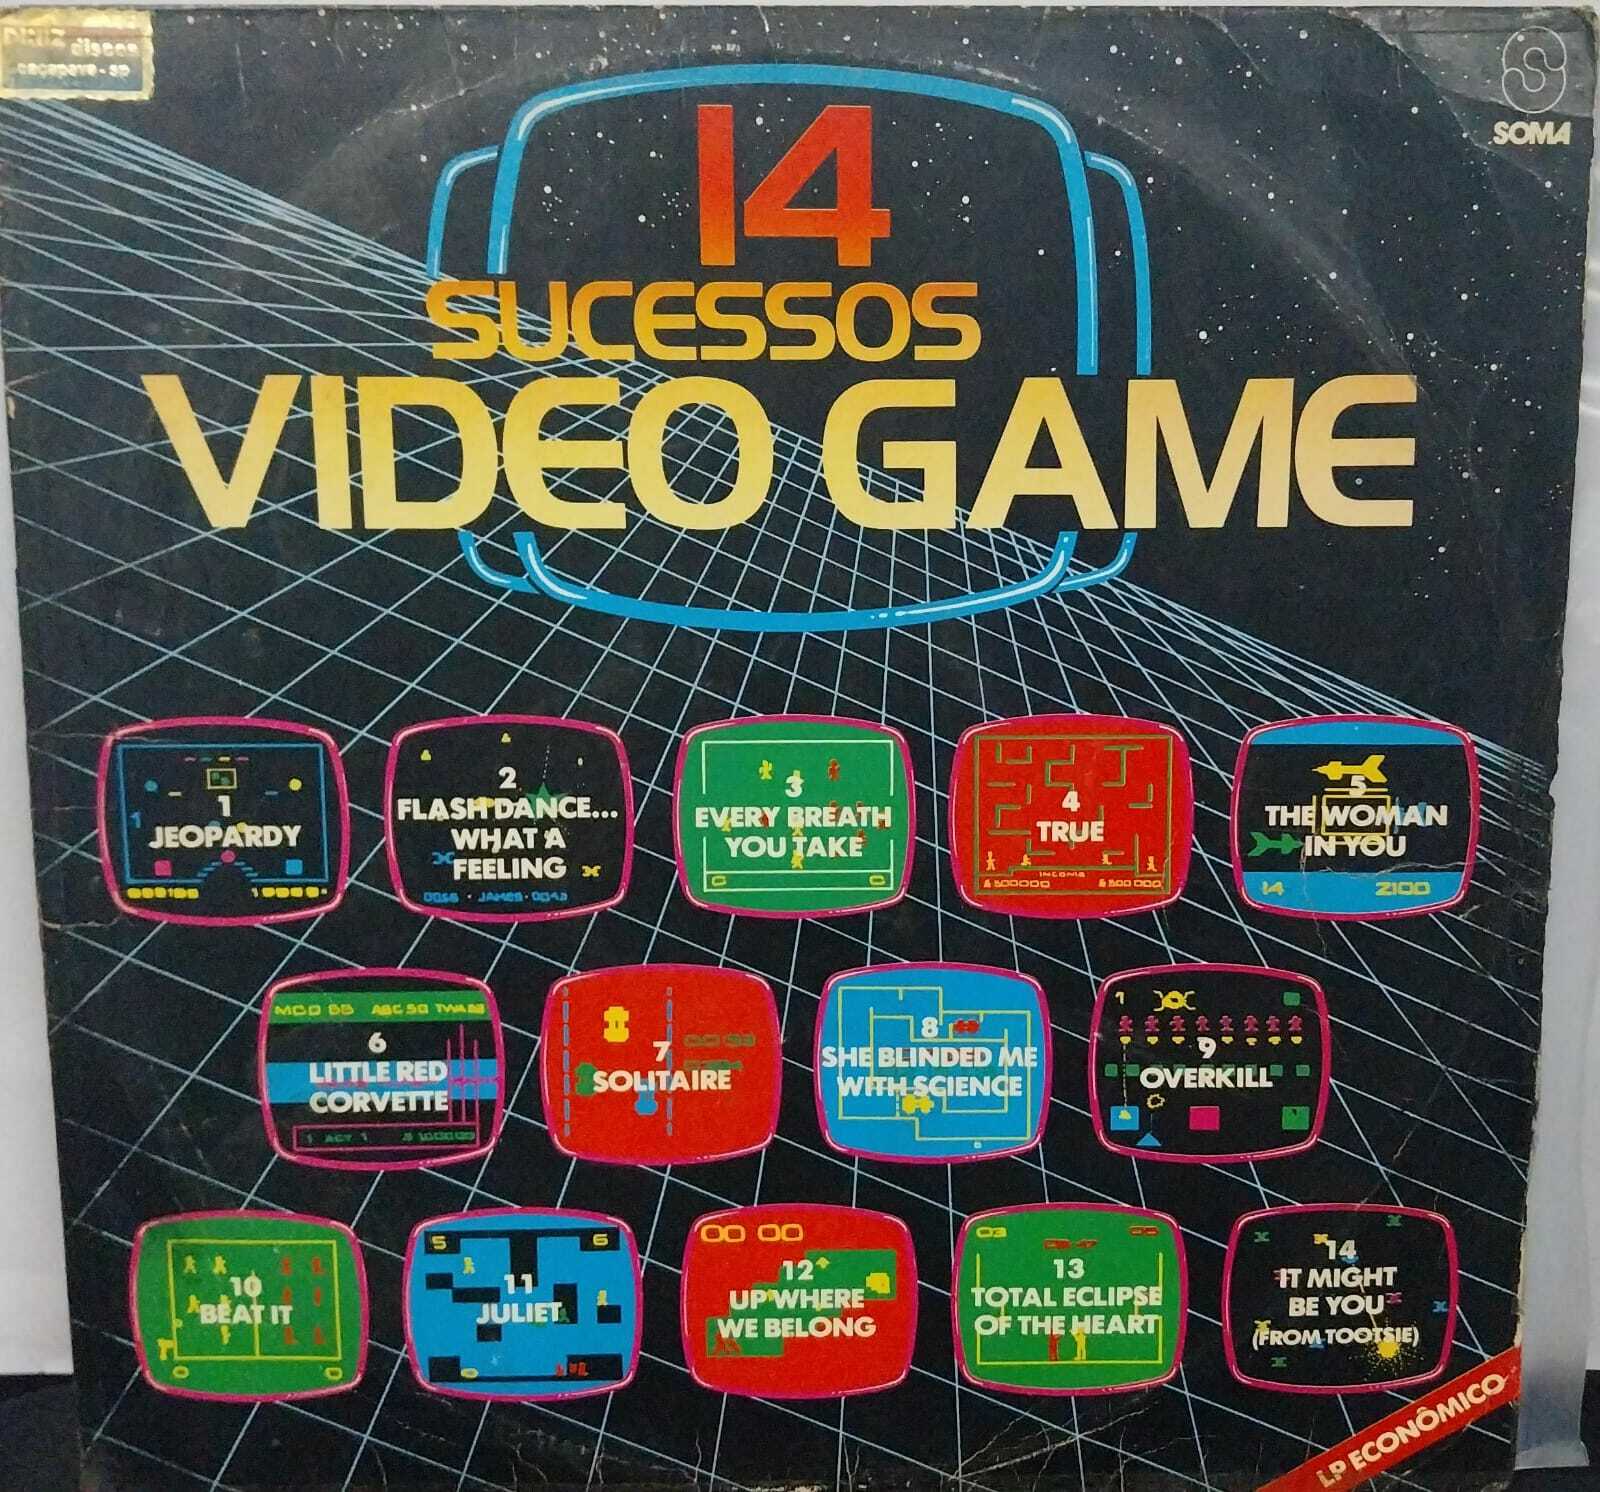 Vinil - Videogame Group - 14 Sucessos Video Game